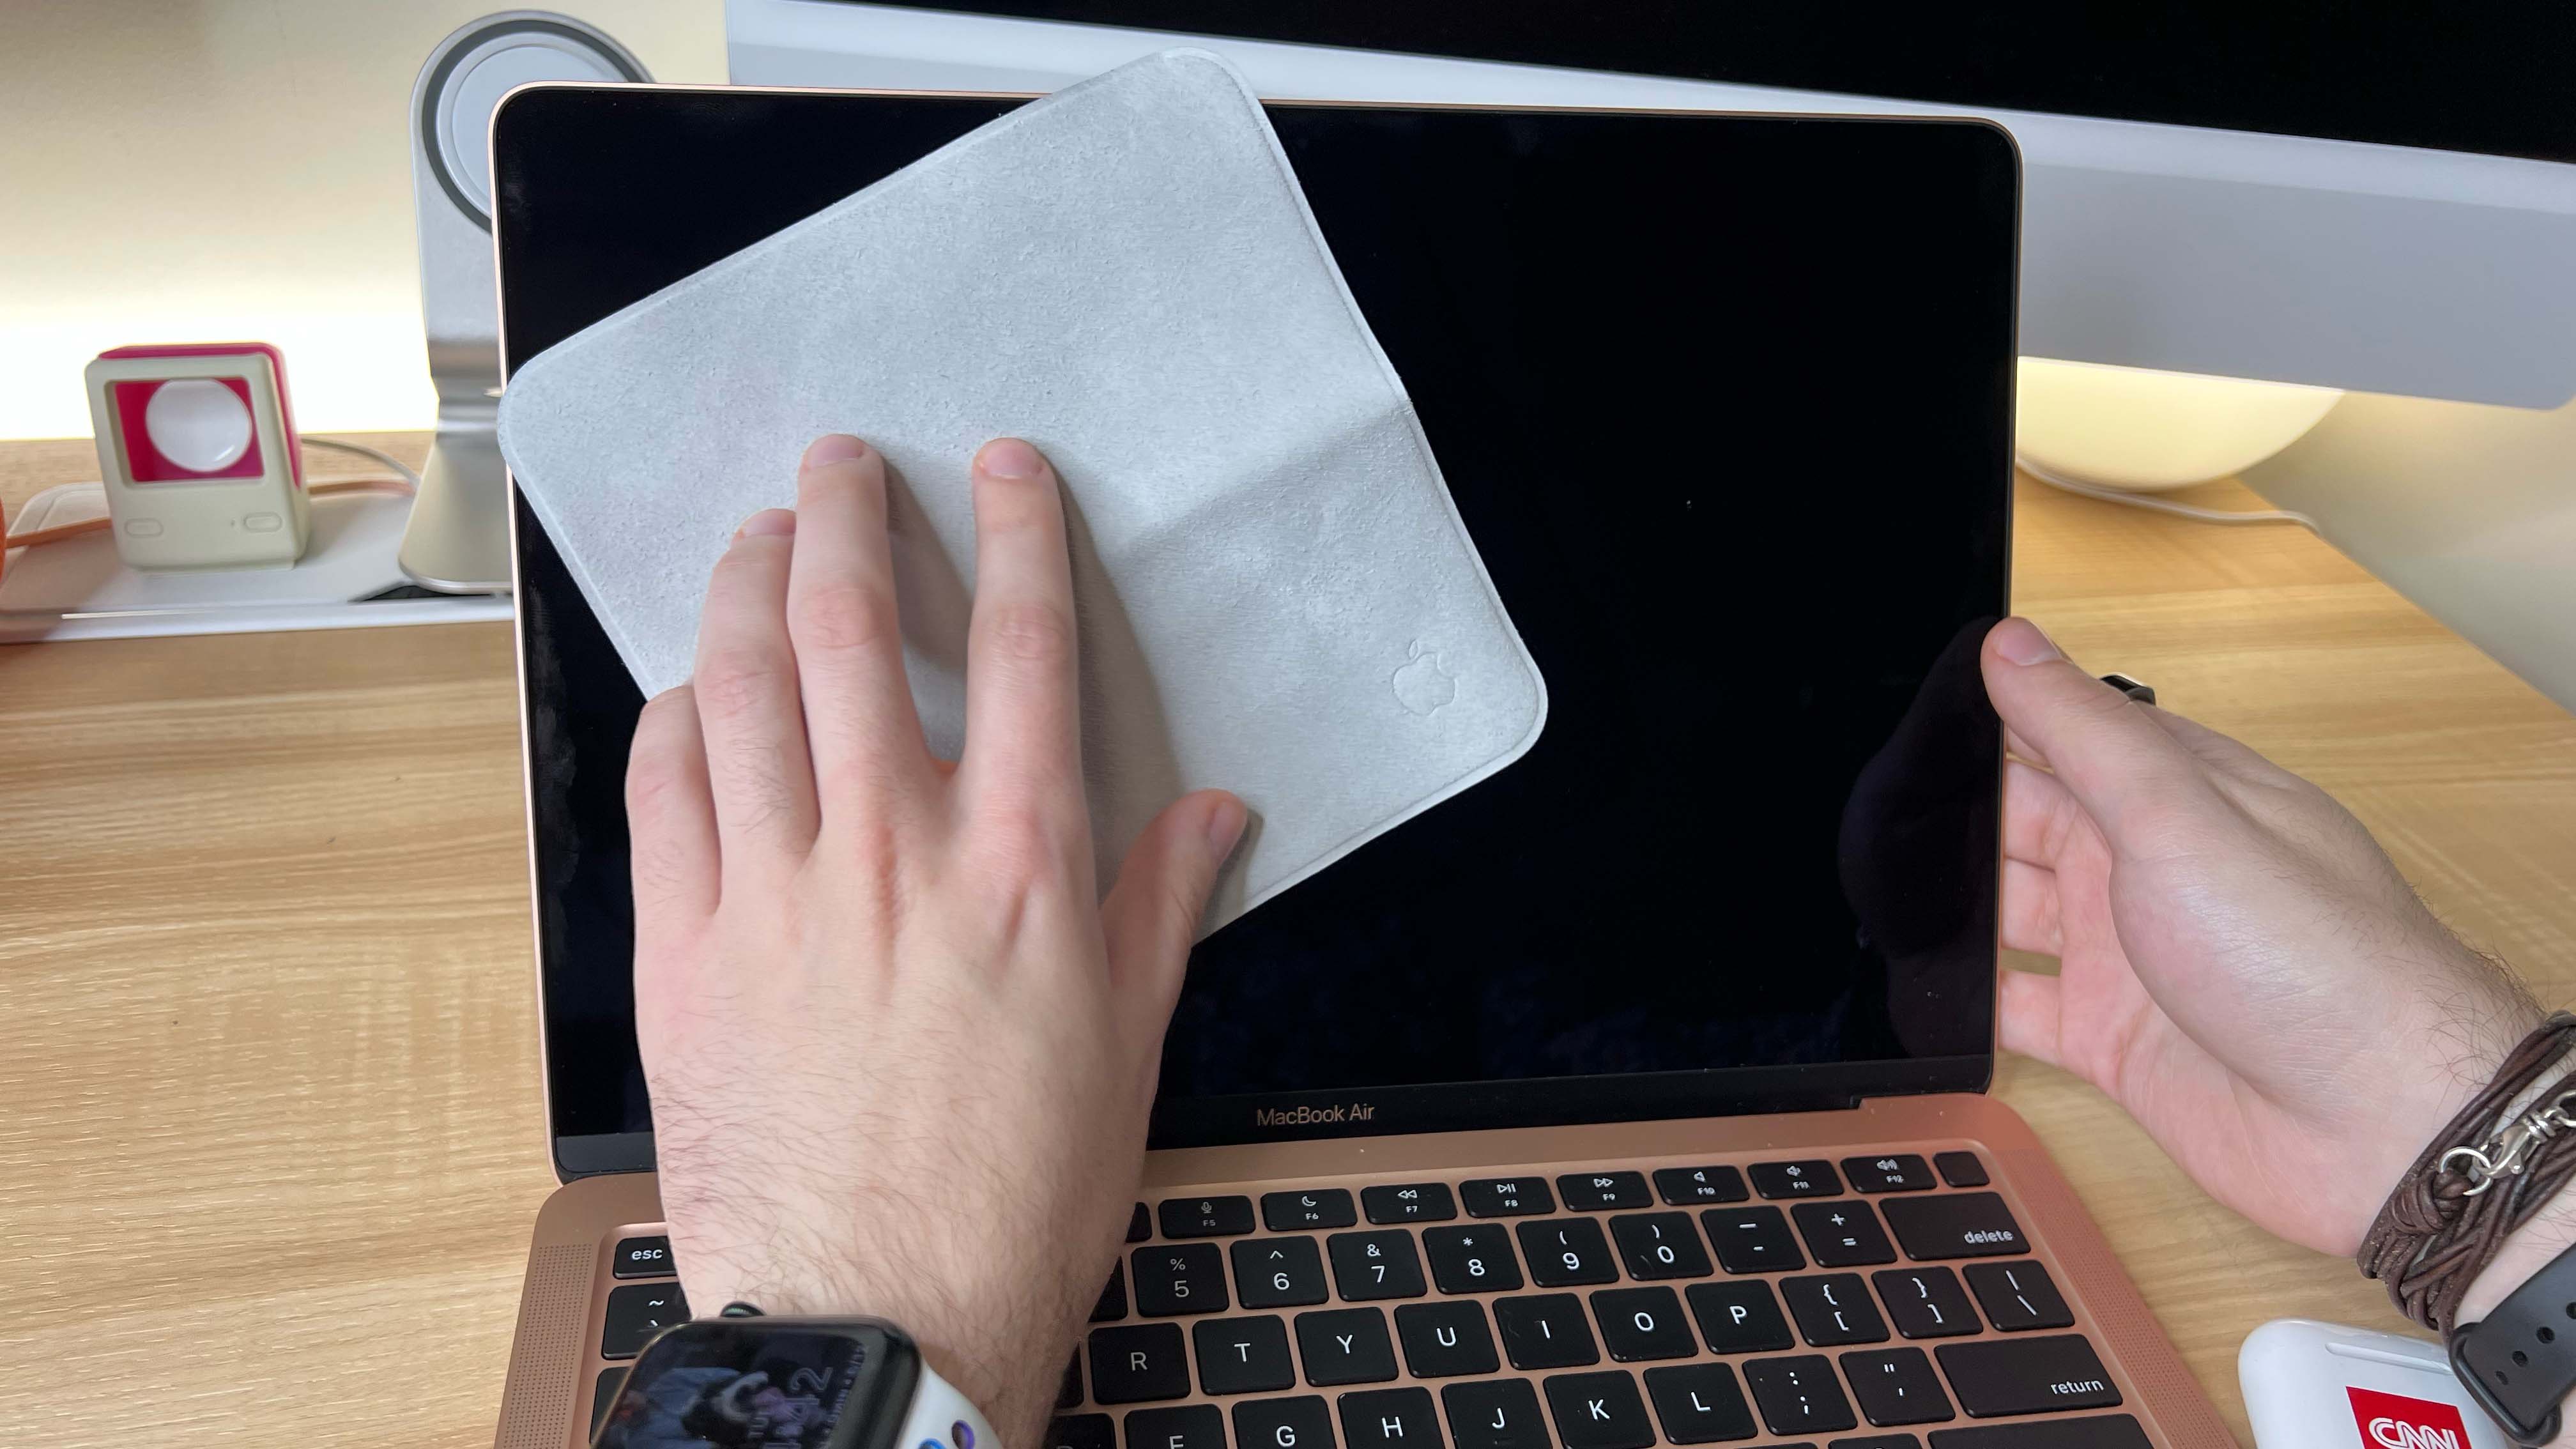 Apple Polishing Cloth review: Is the $19 cloth worth it? | CNN Underscored